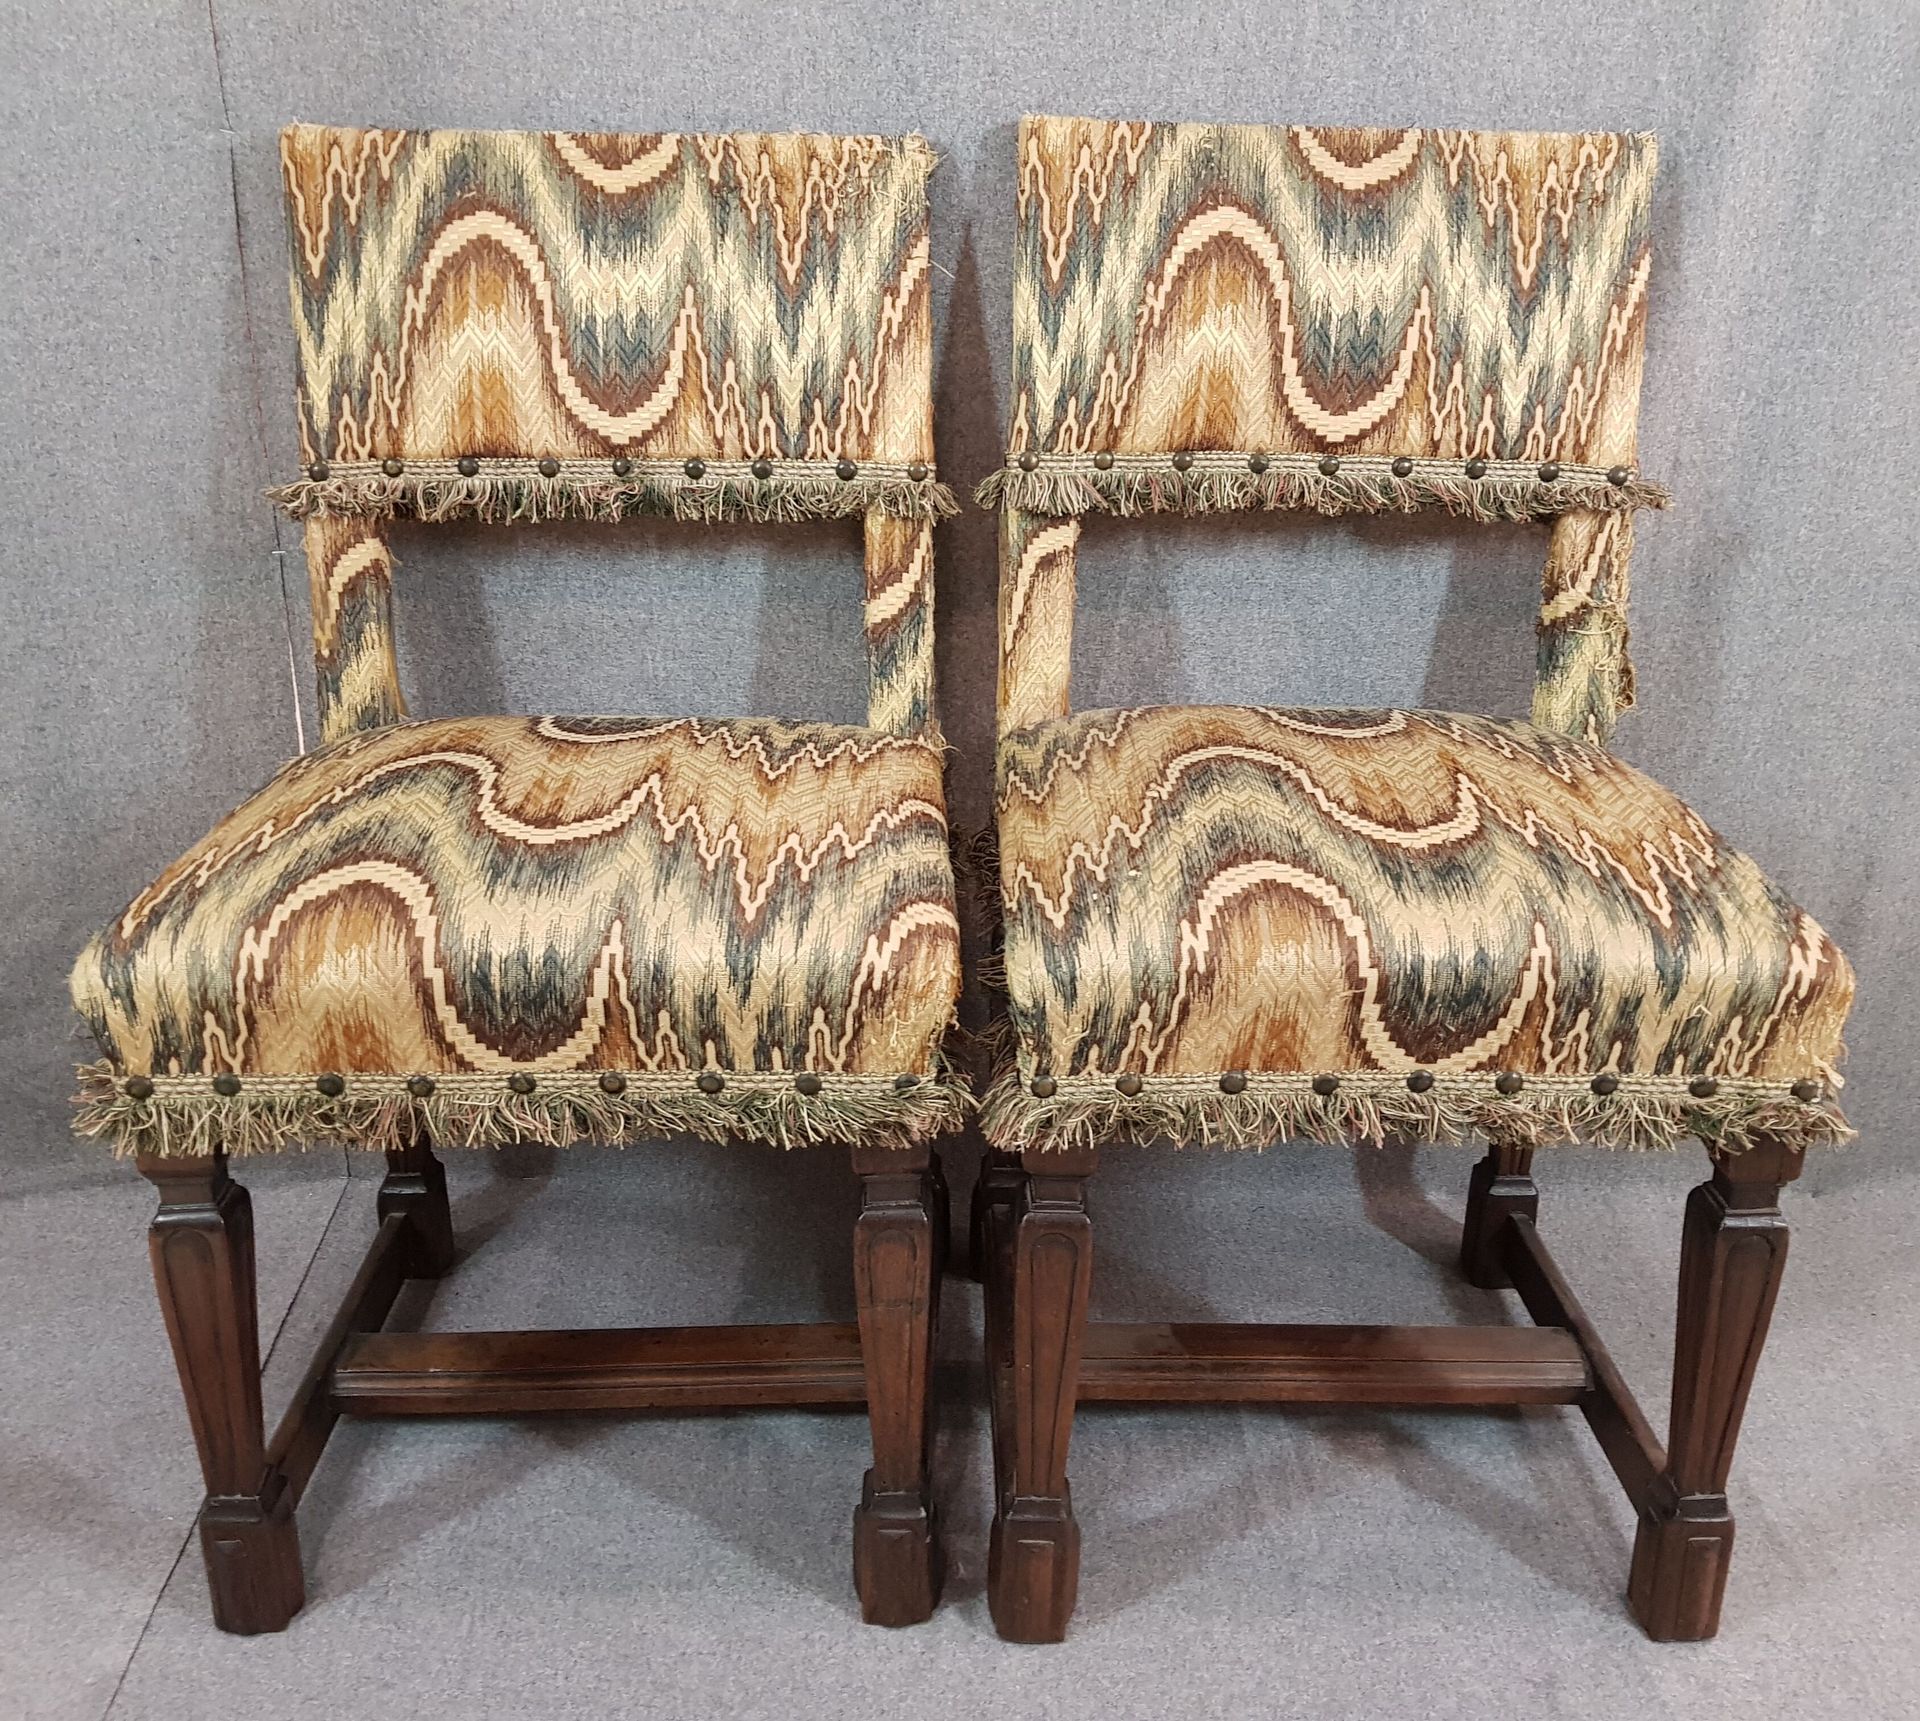 Null TWO Louis XIII chairs in walnut with spindle legs and braces - fabric damag&hellip;